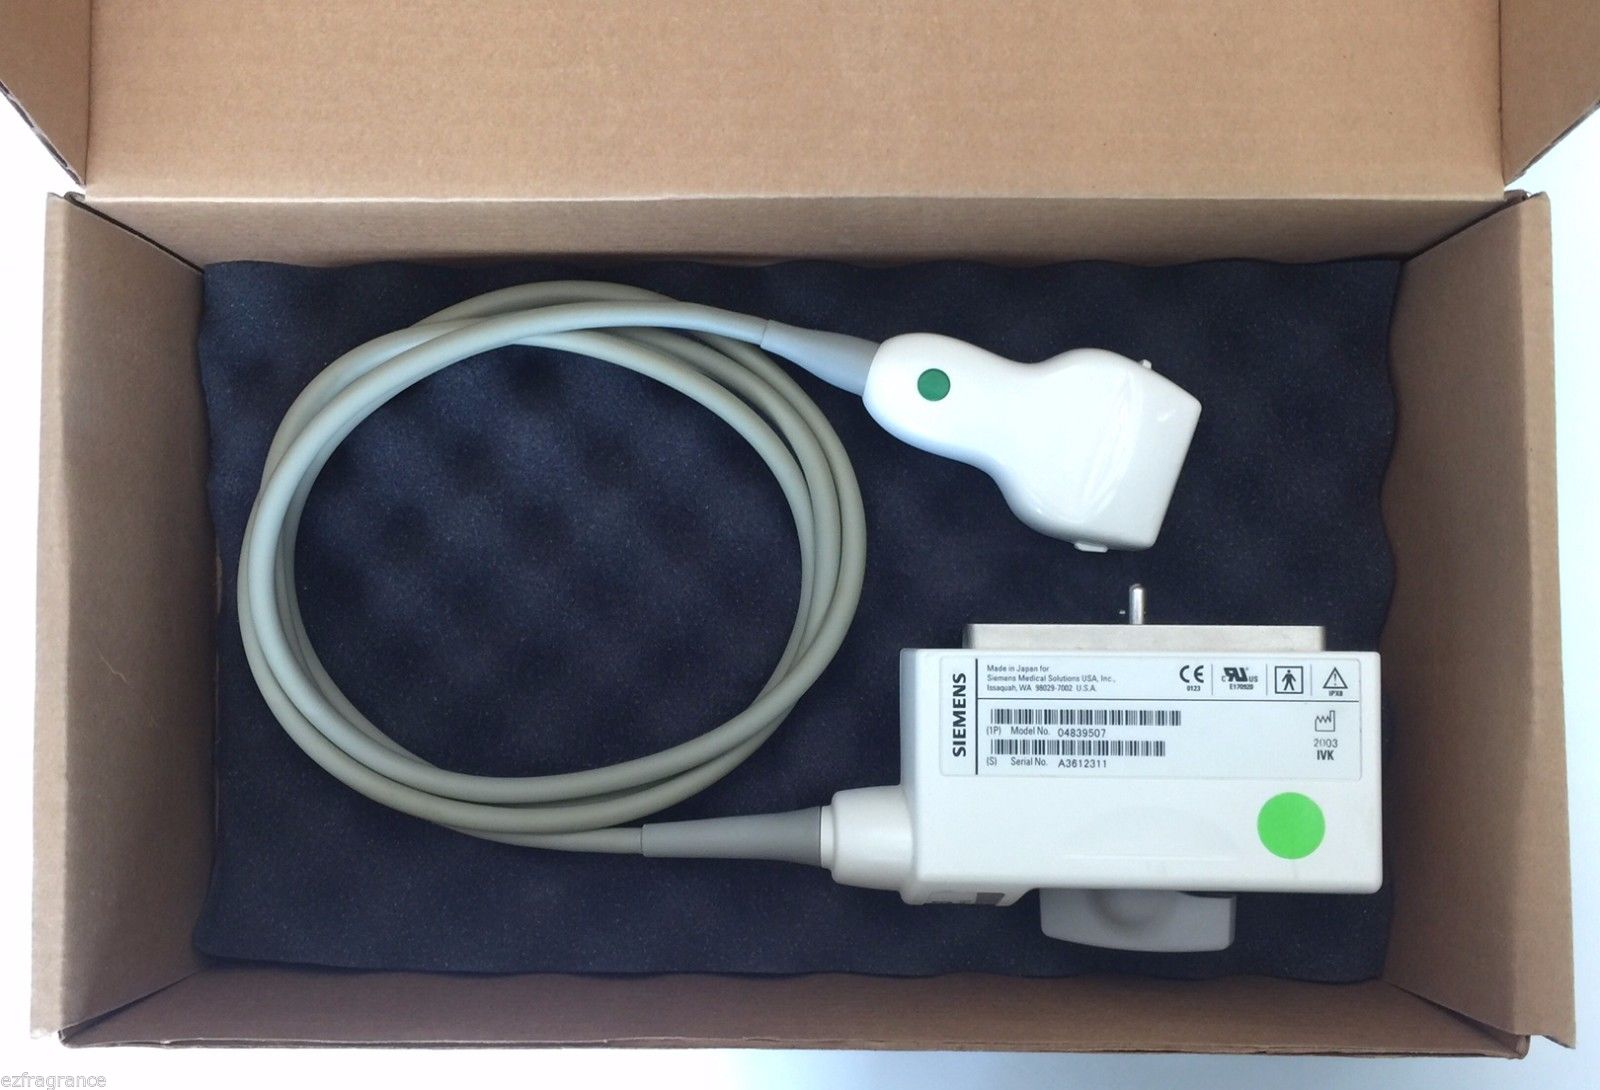 SIEMENS VF7-3 Antares Linear Ultrasoud Transducer Probe.# 04839507 USED No Test DIAGNOSTIC ULTRASOUND MACHINES FOR SALE